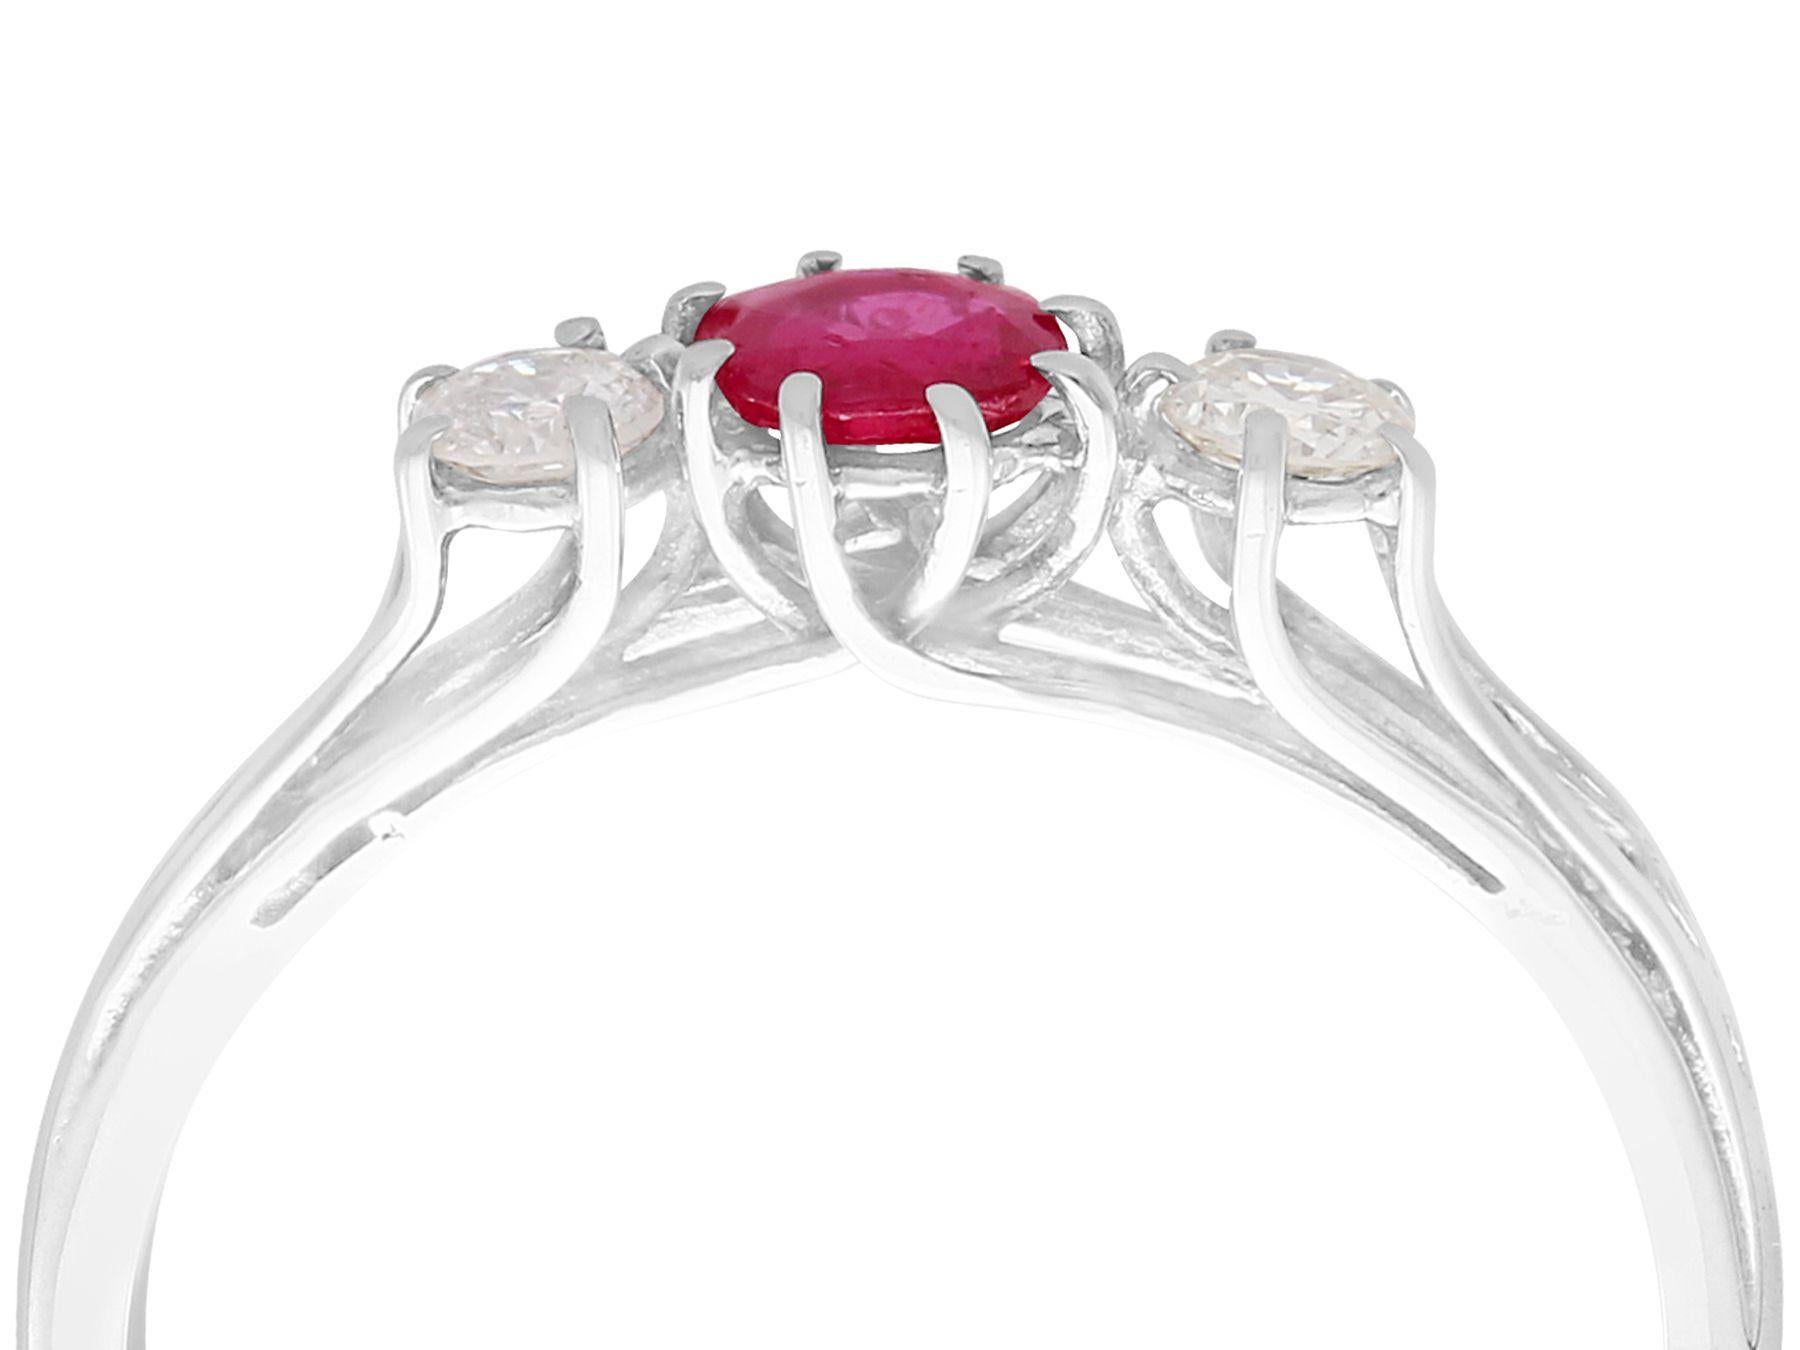 A very good vintage 0.56 carat ruby and 0.25 carat diamond, 18 karat white gold, multi strand trilogy/three stone ring; part of our vintage jewelry and estate jewelry collections

This very good ruby and diamond dress ring has been crafted in 18k